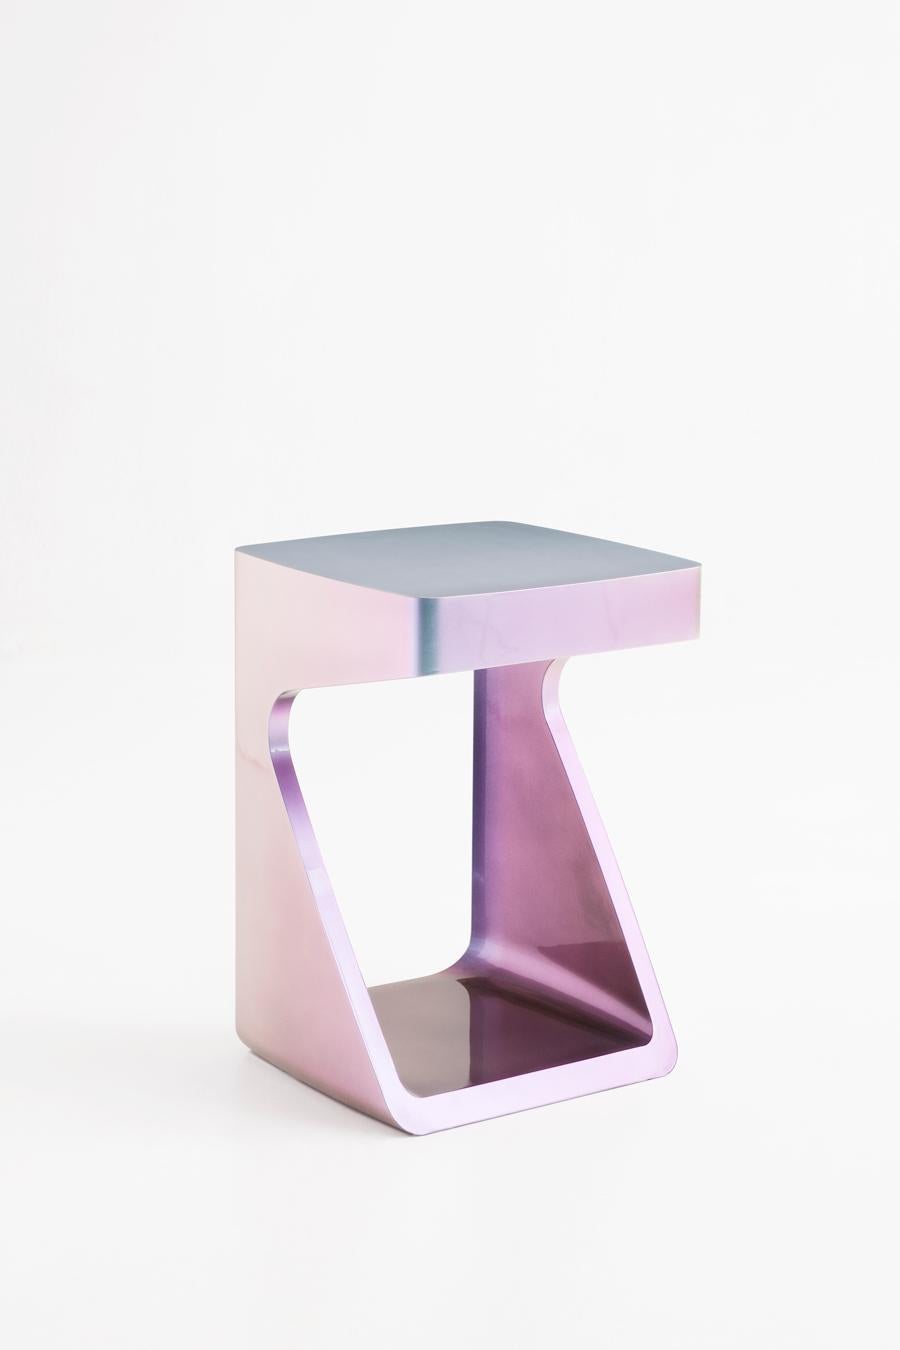 Spanish Adolfo Abejon 'Orion' Limited Edition Side Table